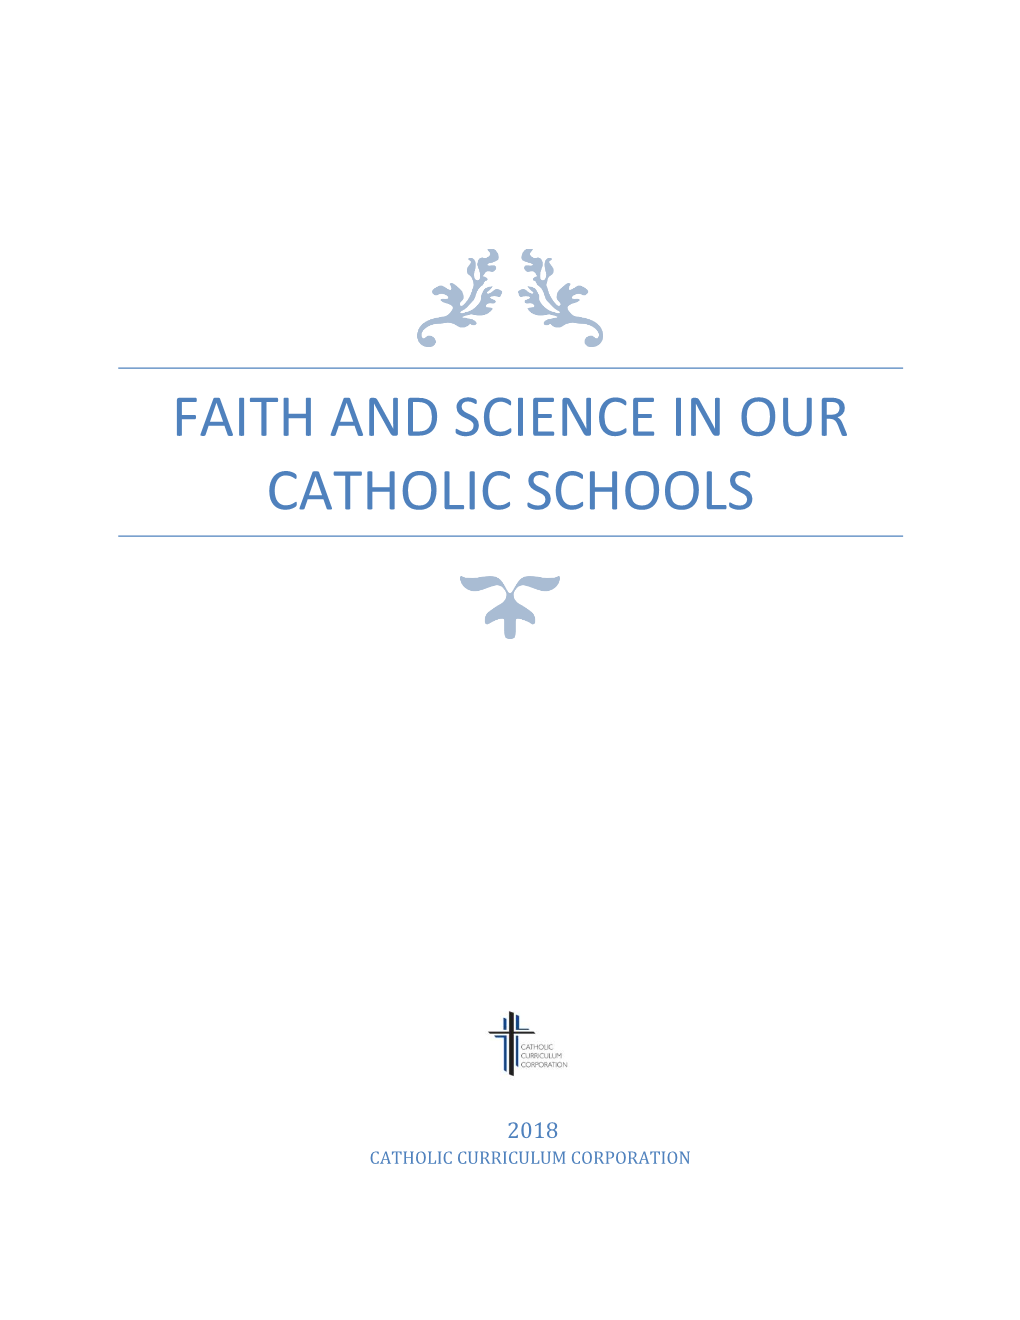 Faith and Science in Our Catholic Schools